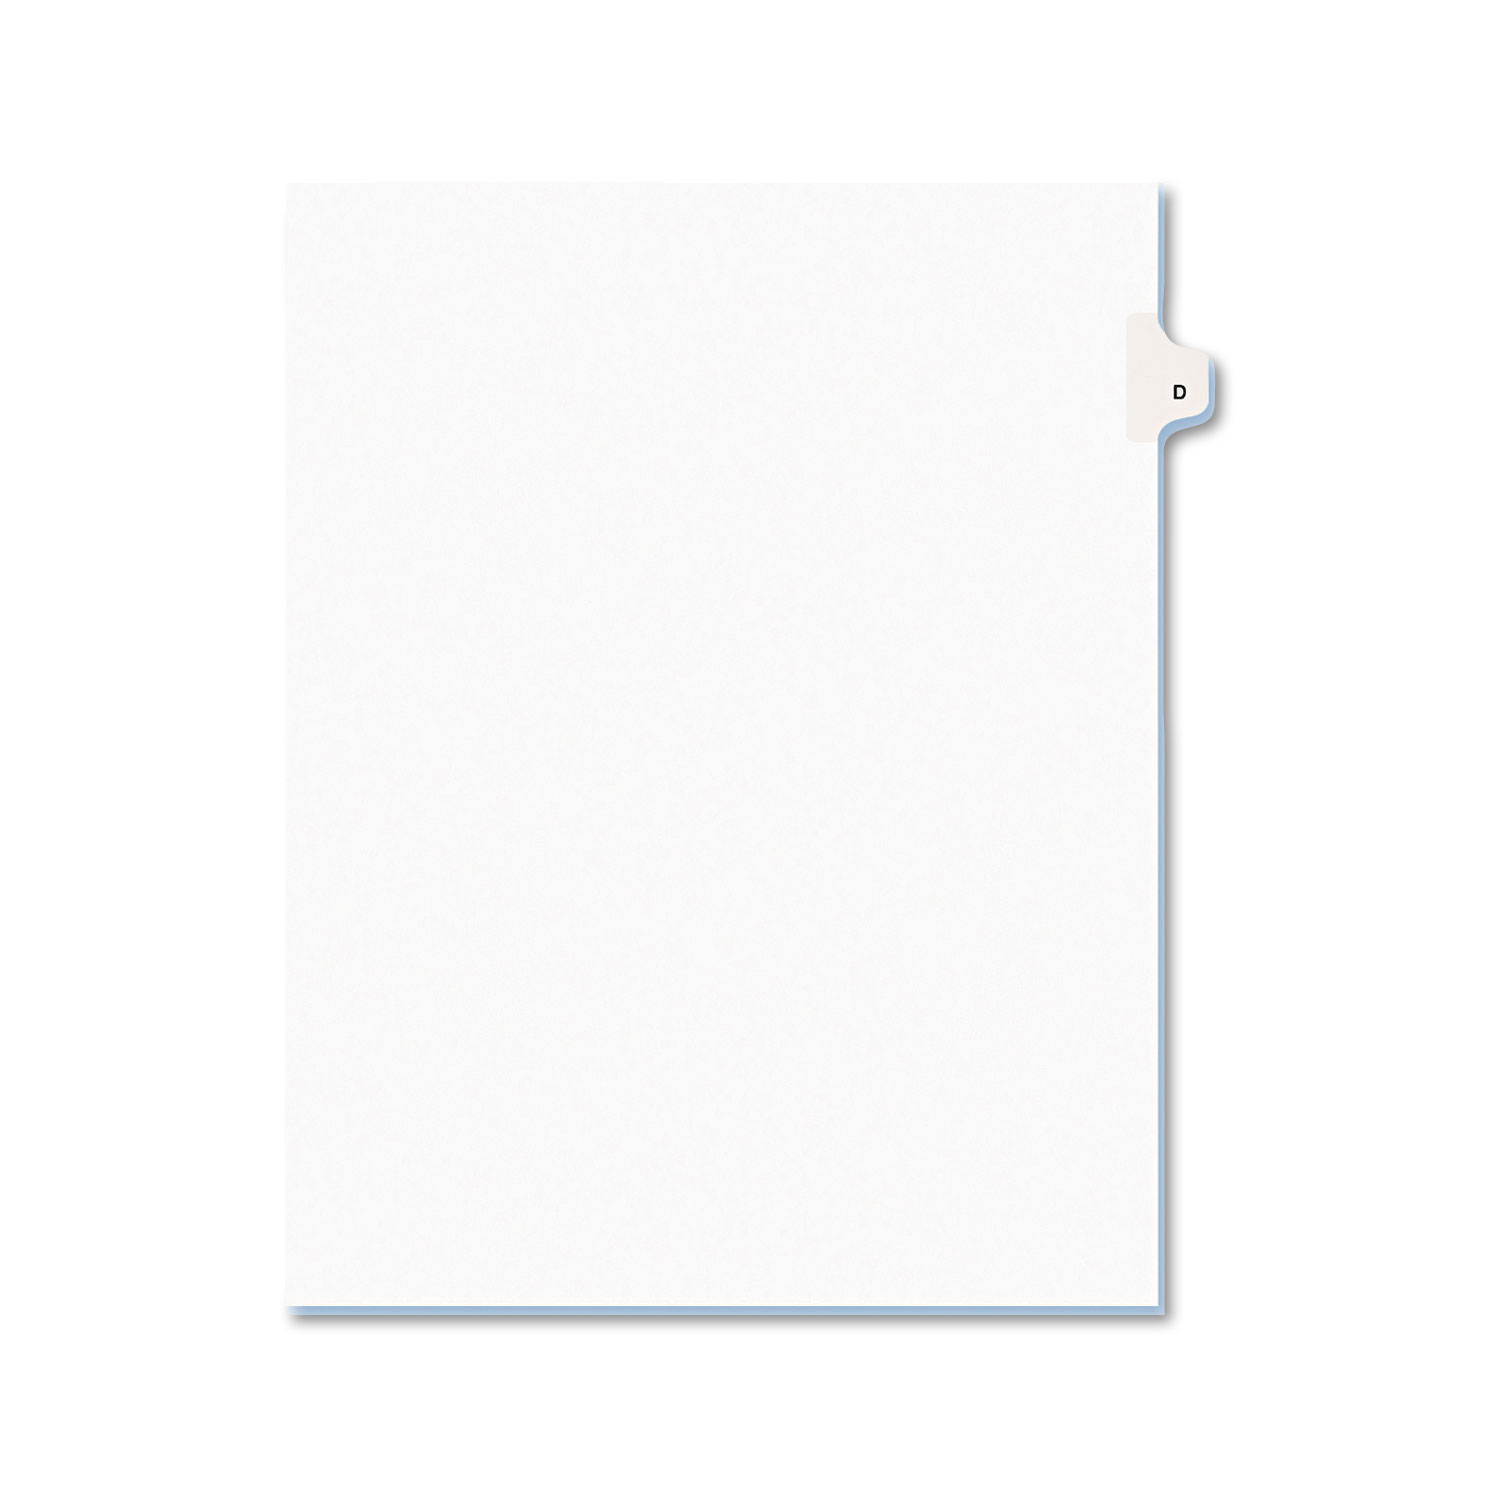  Avery 01404 Preprinted Legal Exhibit Side Tab Index Dividers, Avery Style, 26-Tab, D, 11 x 8.5, White, 25/Pack (AVE01404) 